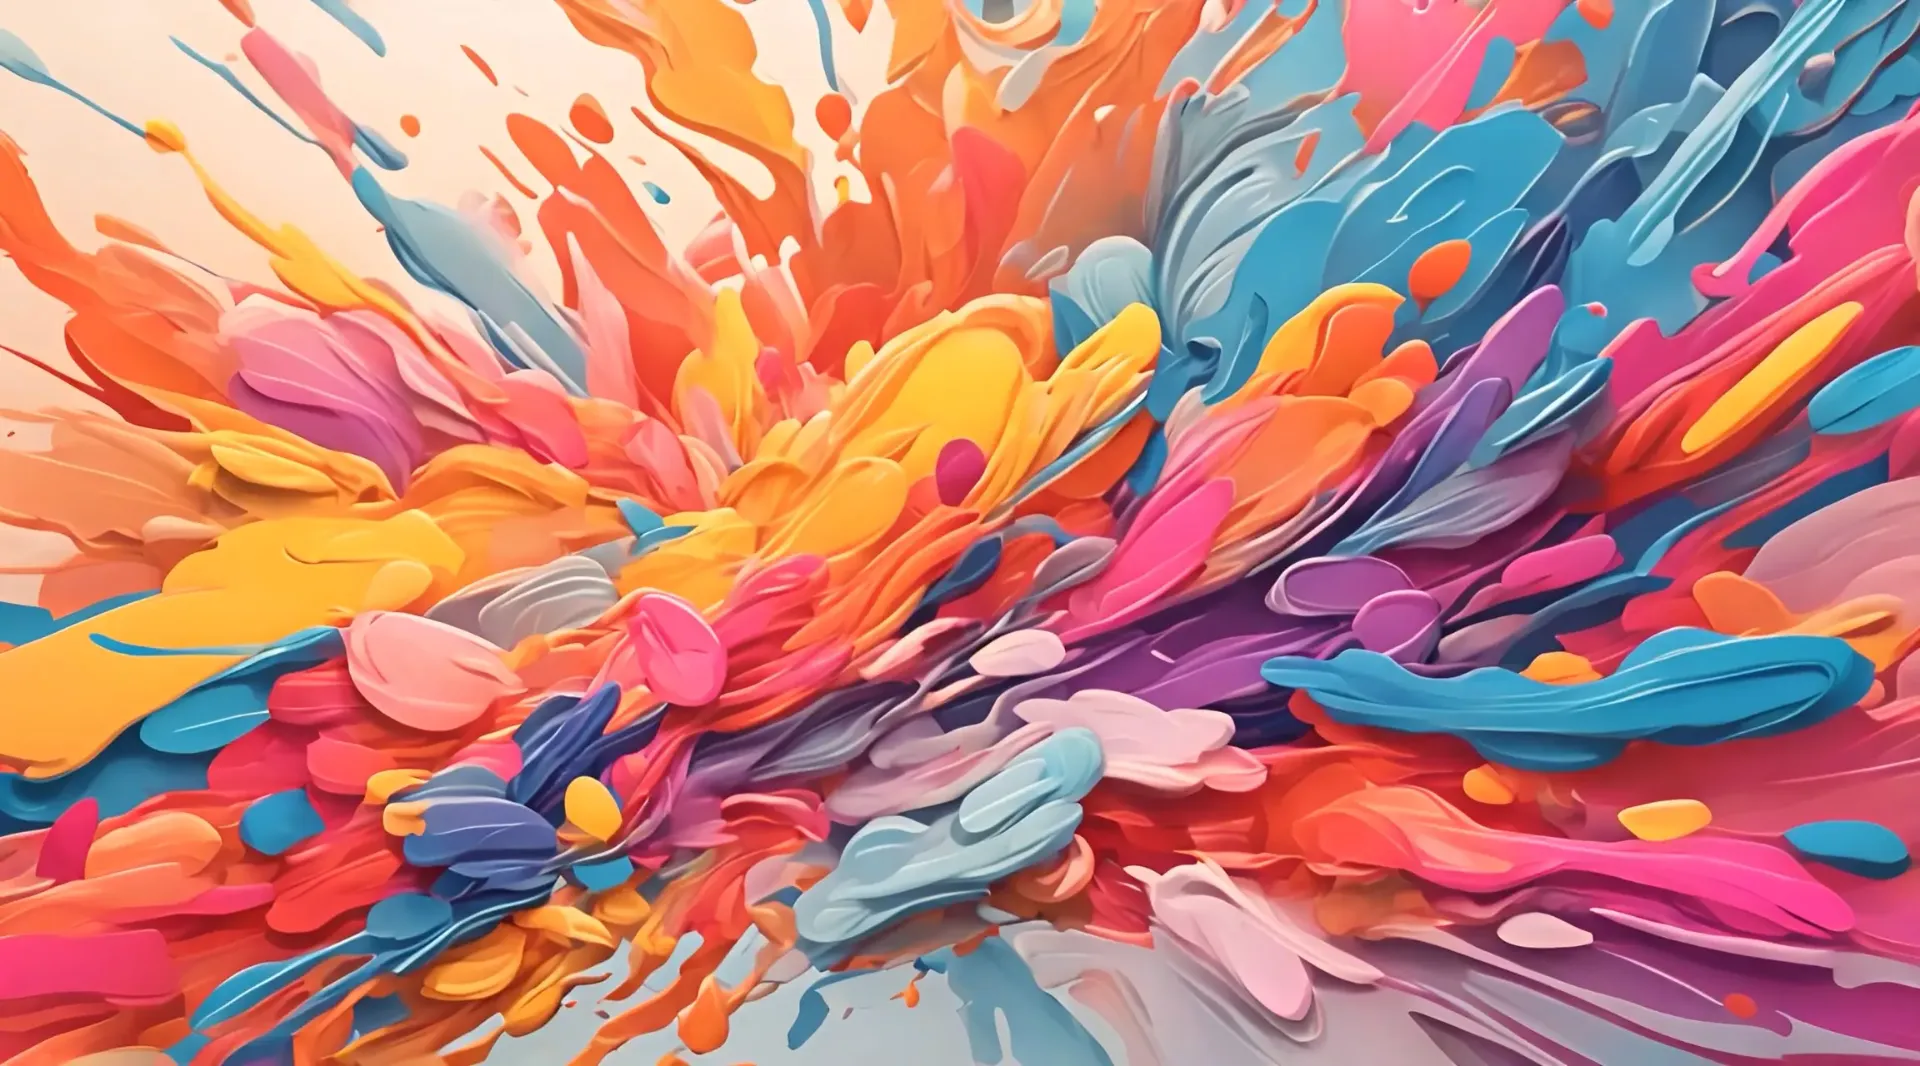 Colorful Dreamscape Dynamic Abstract Splash Art